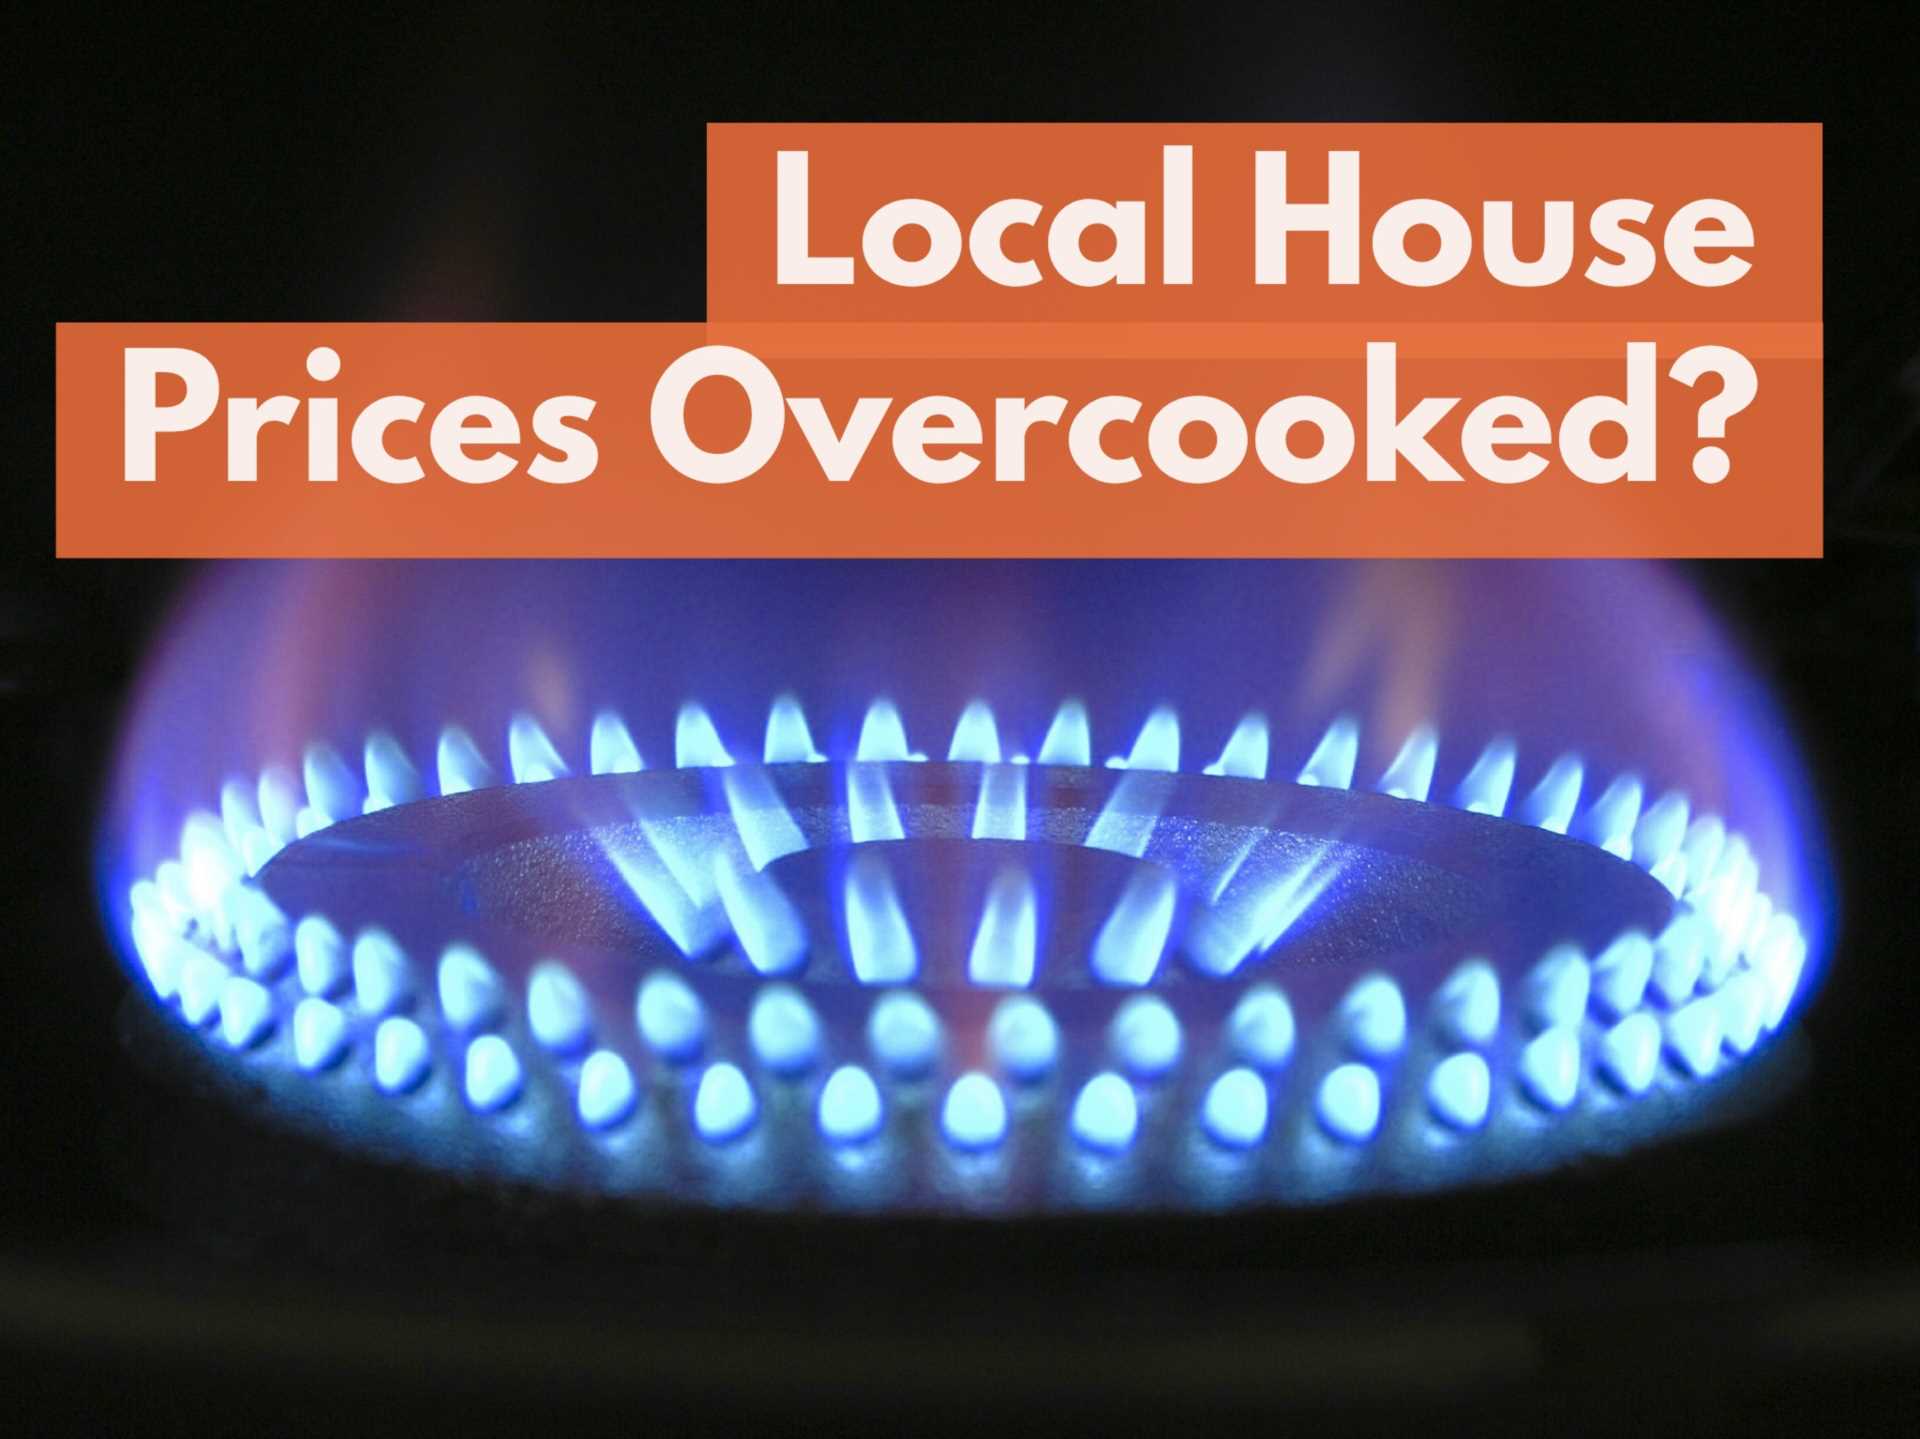 Local House Prices Overcooked?